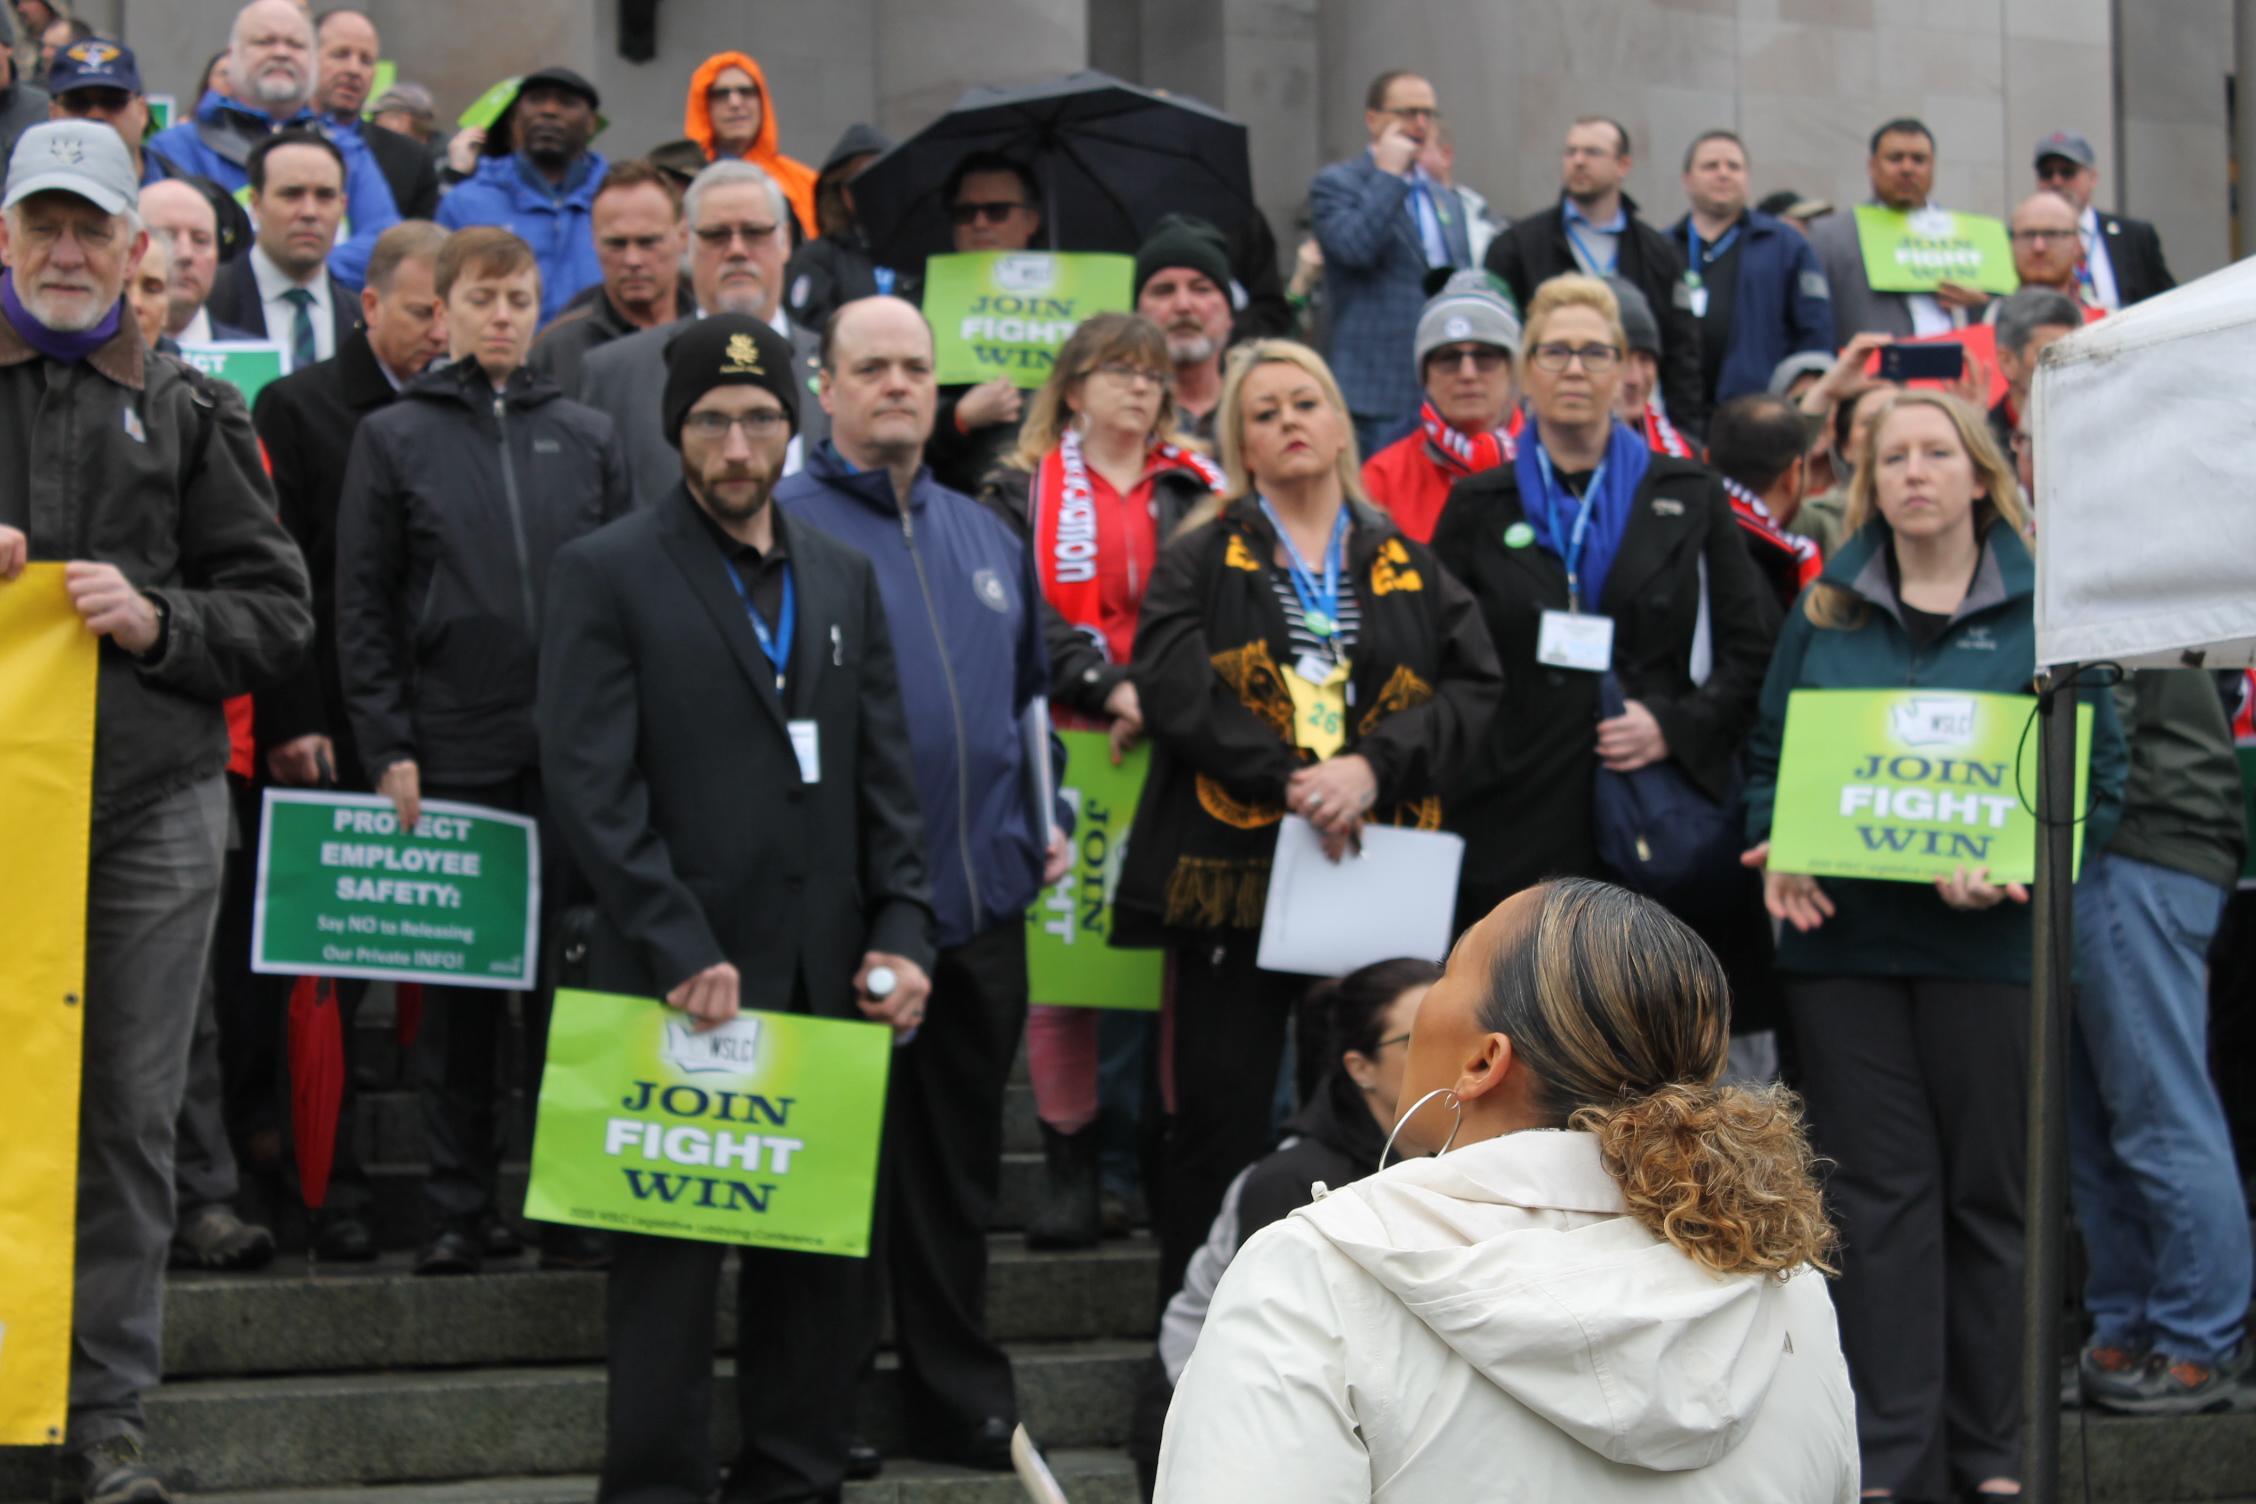 Washington State Labor Council Secretary Treasurer April Sims speaks to the crowd at the HB 1888 rally.